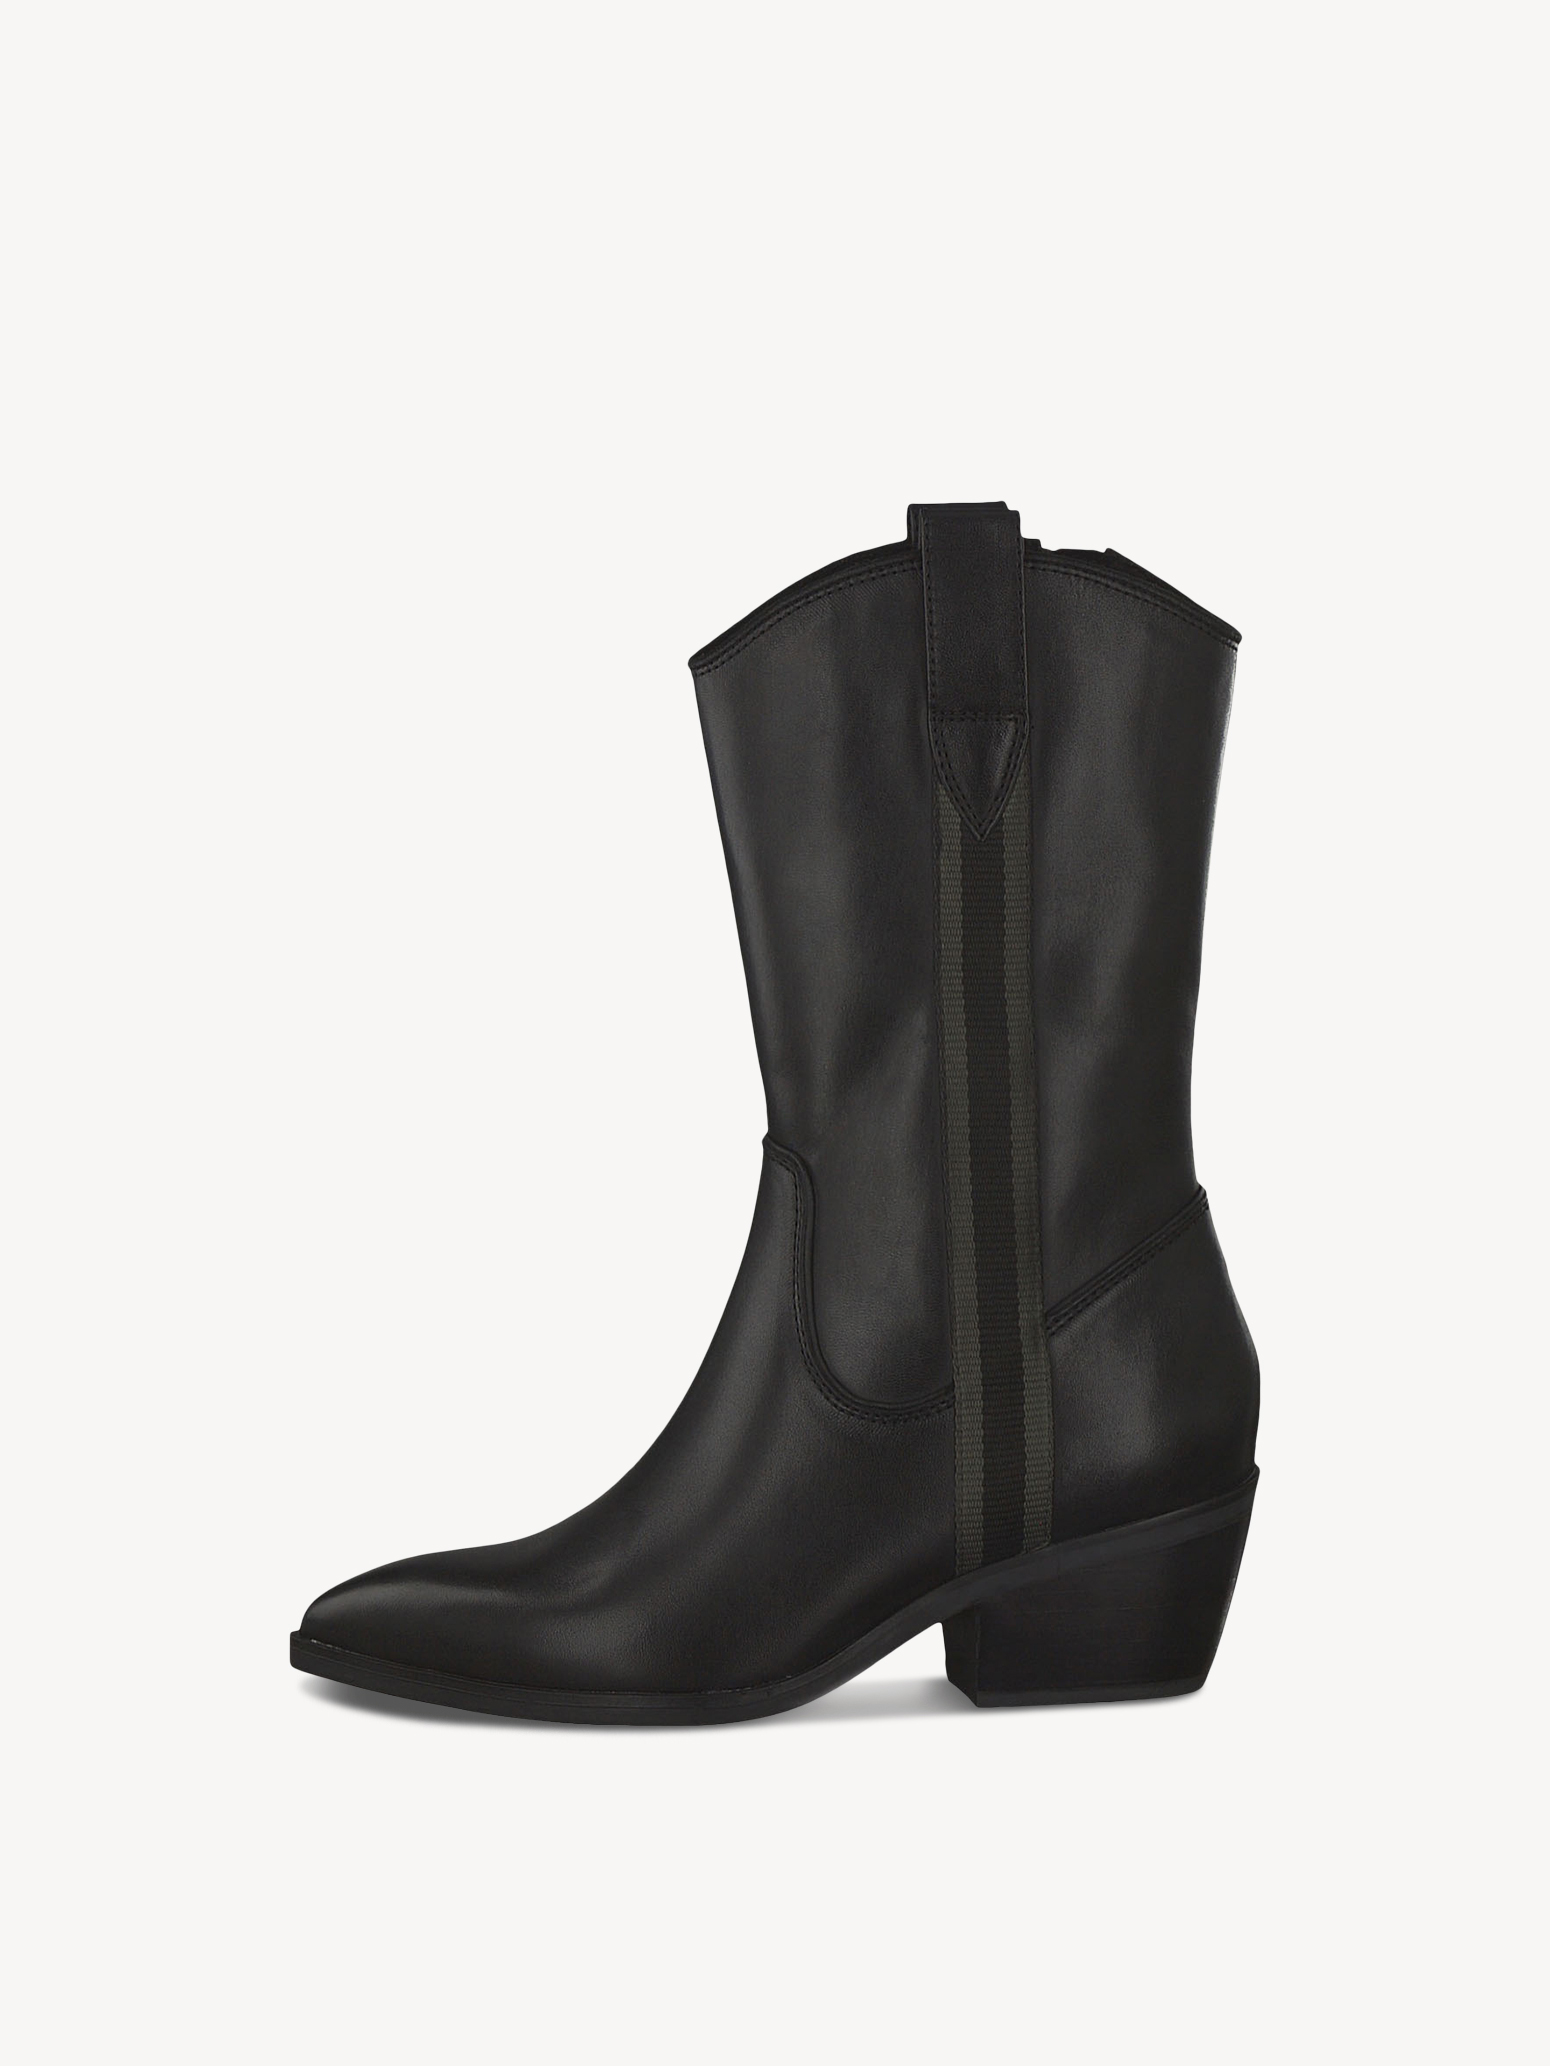 Leather Boots - black 1-1-25700-23-003 